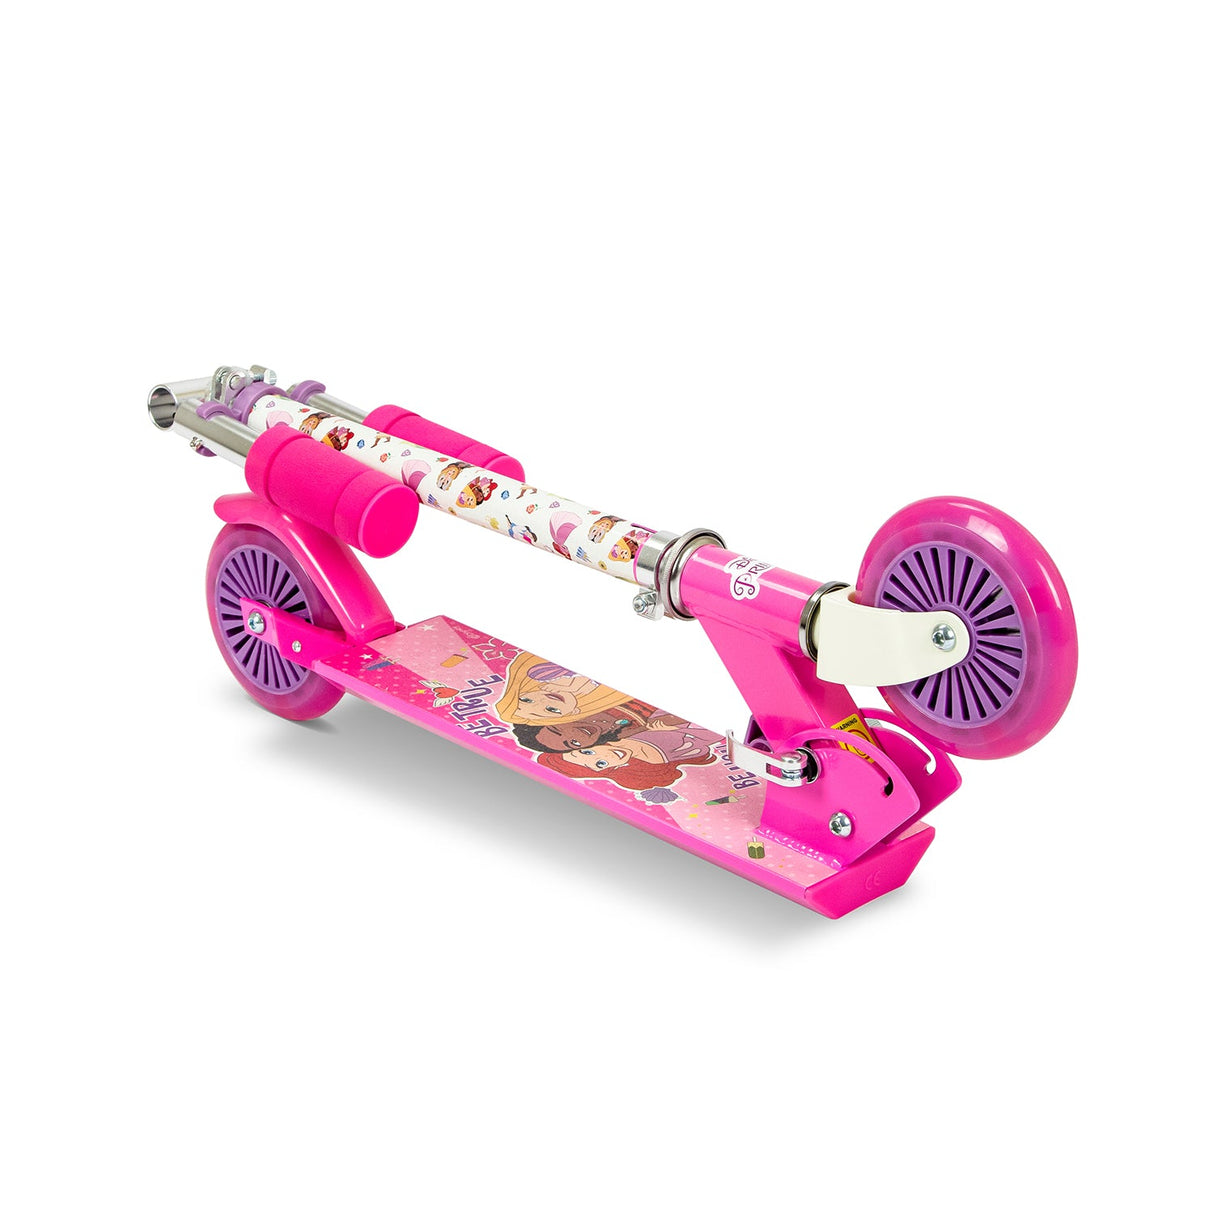 Spartan Princess 2 wheel Scooter - with LED light